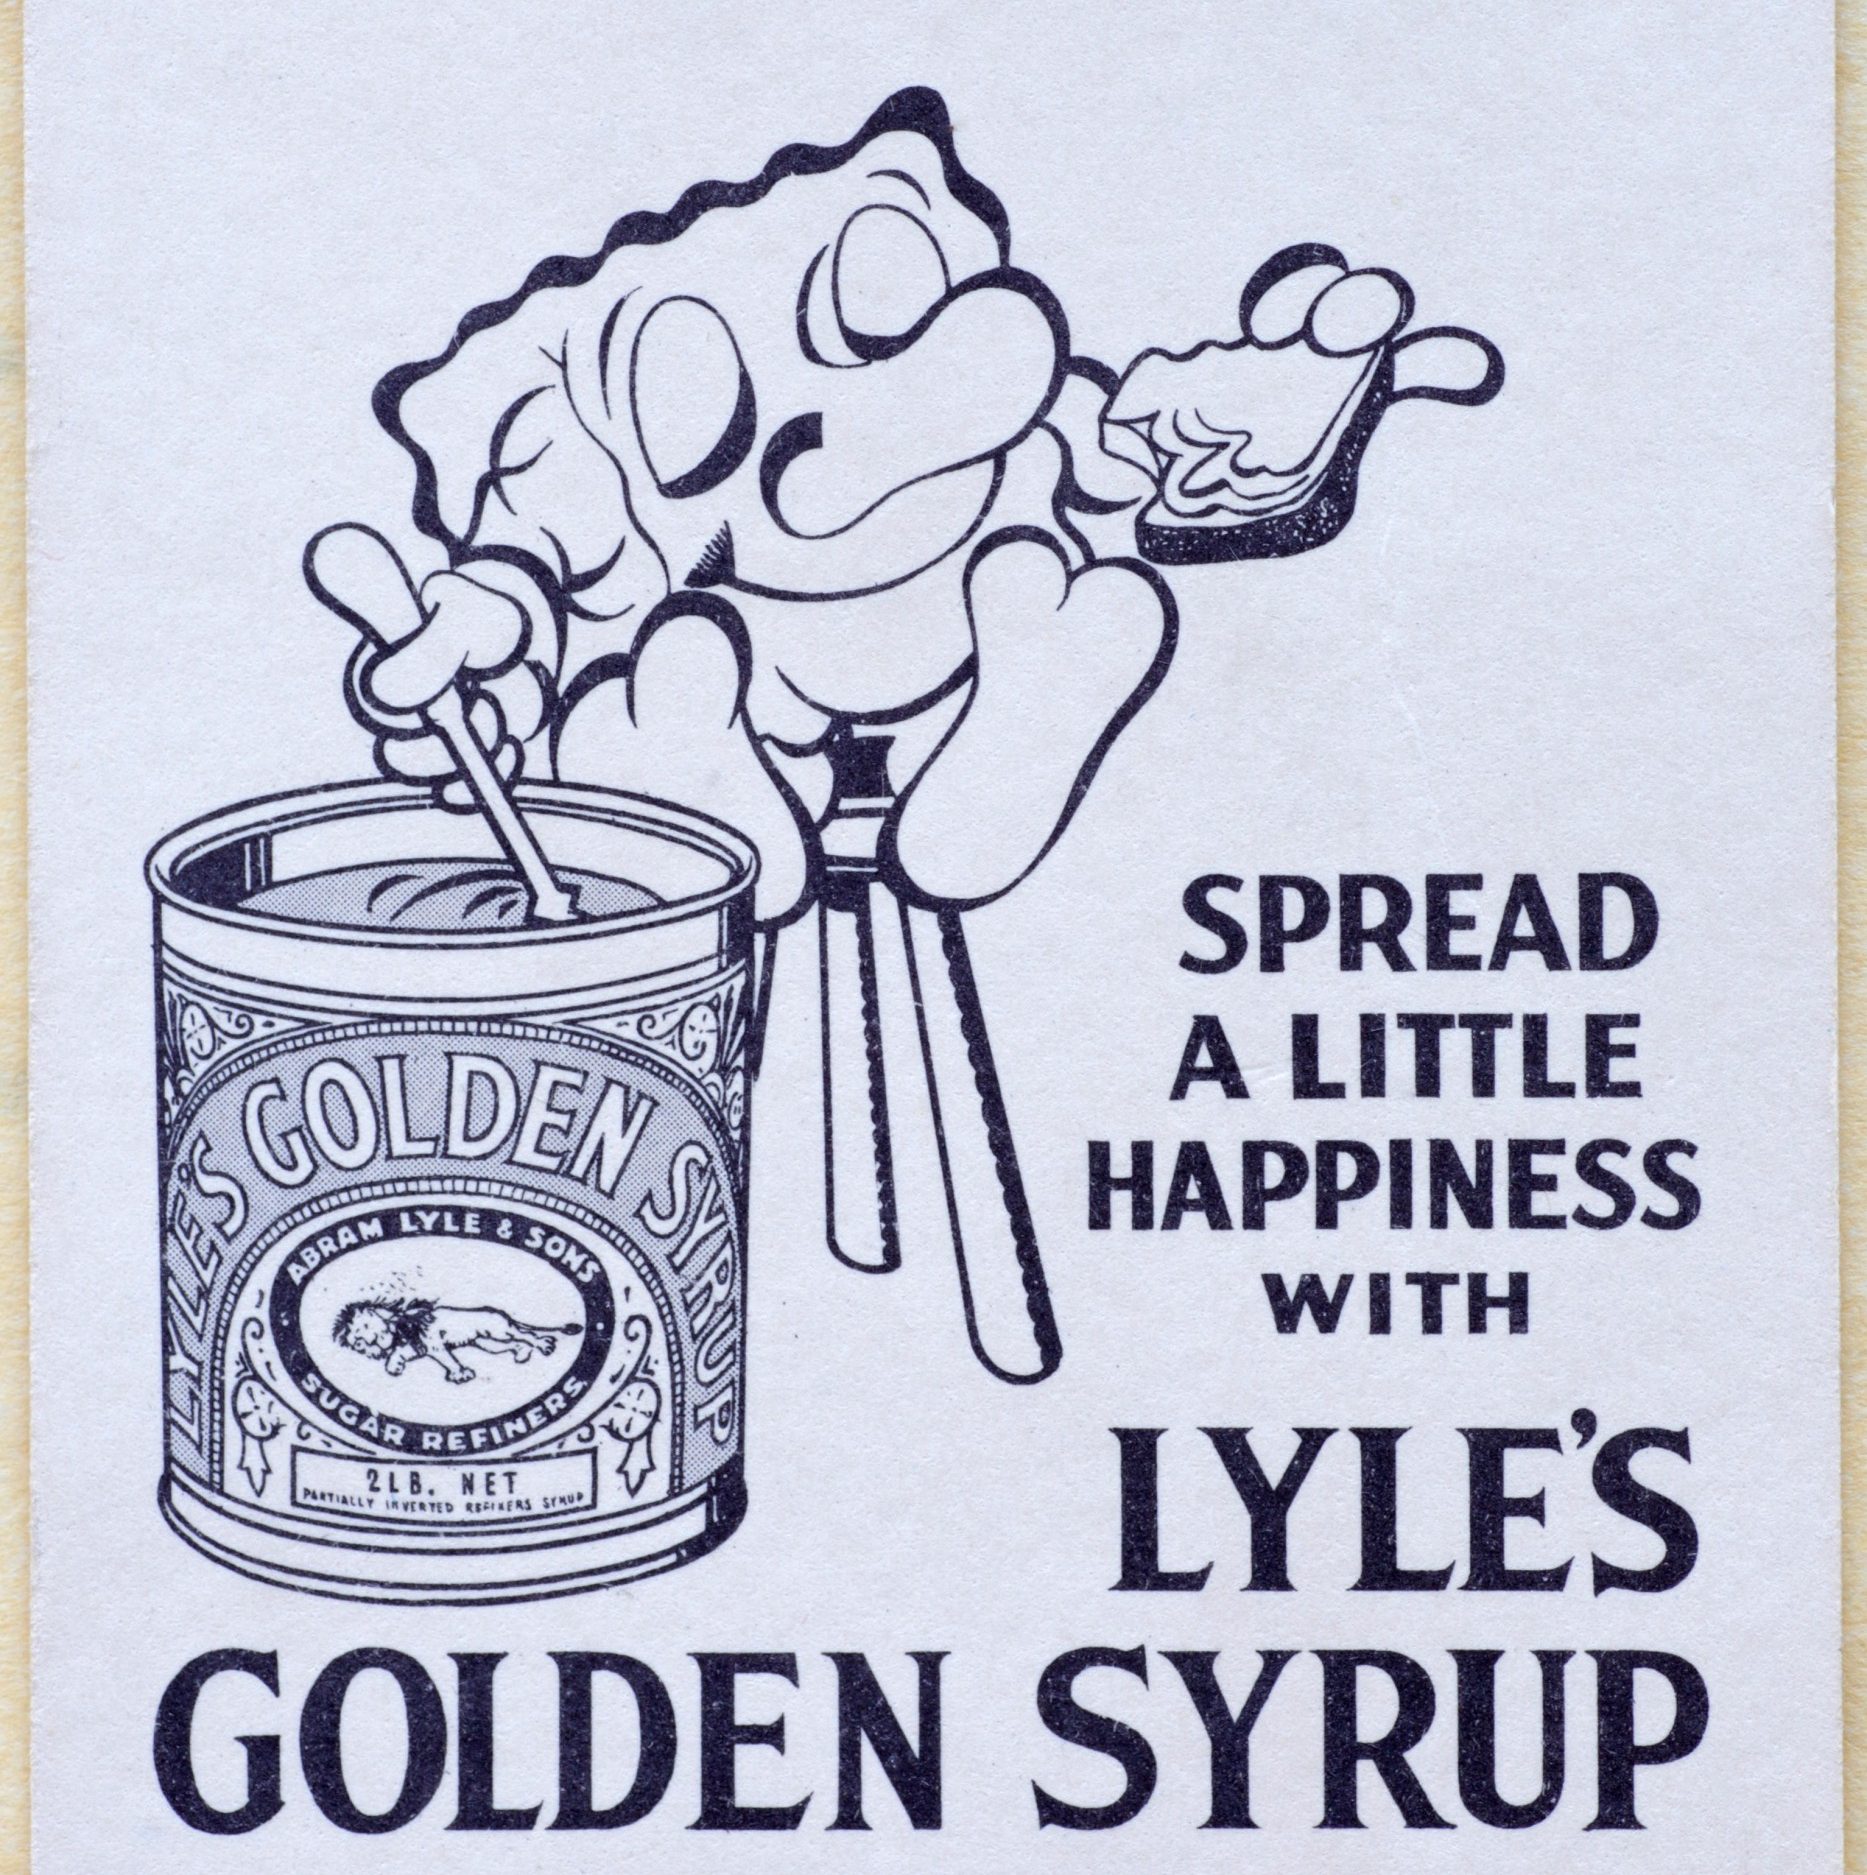 lyle's golden syrup attacked by christians over logo change